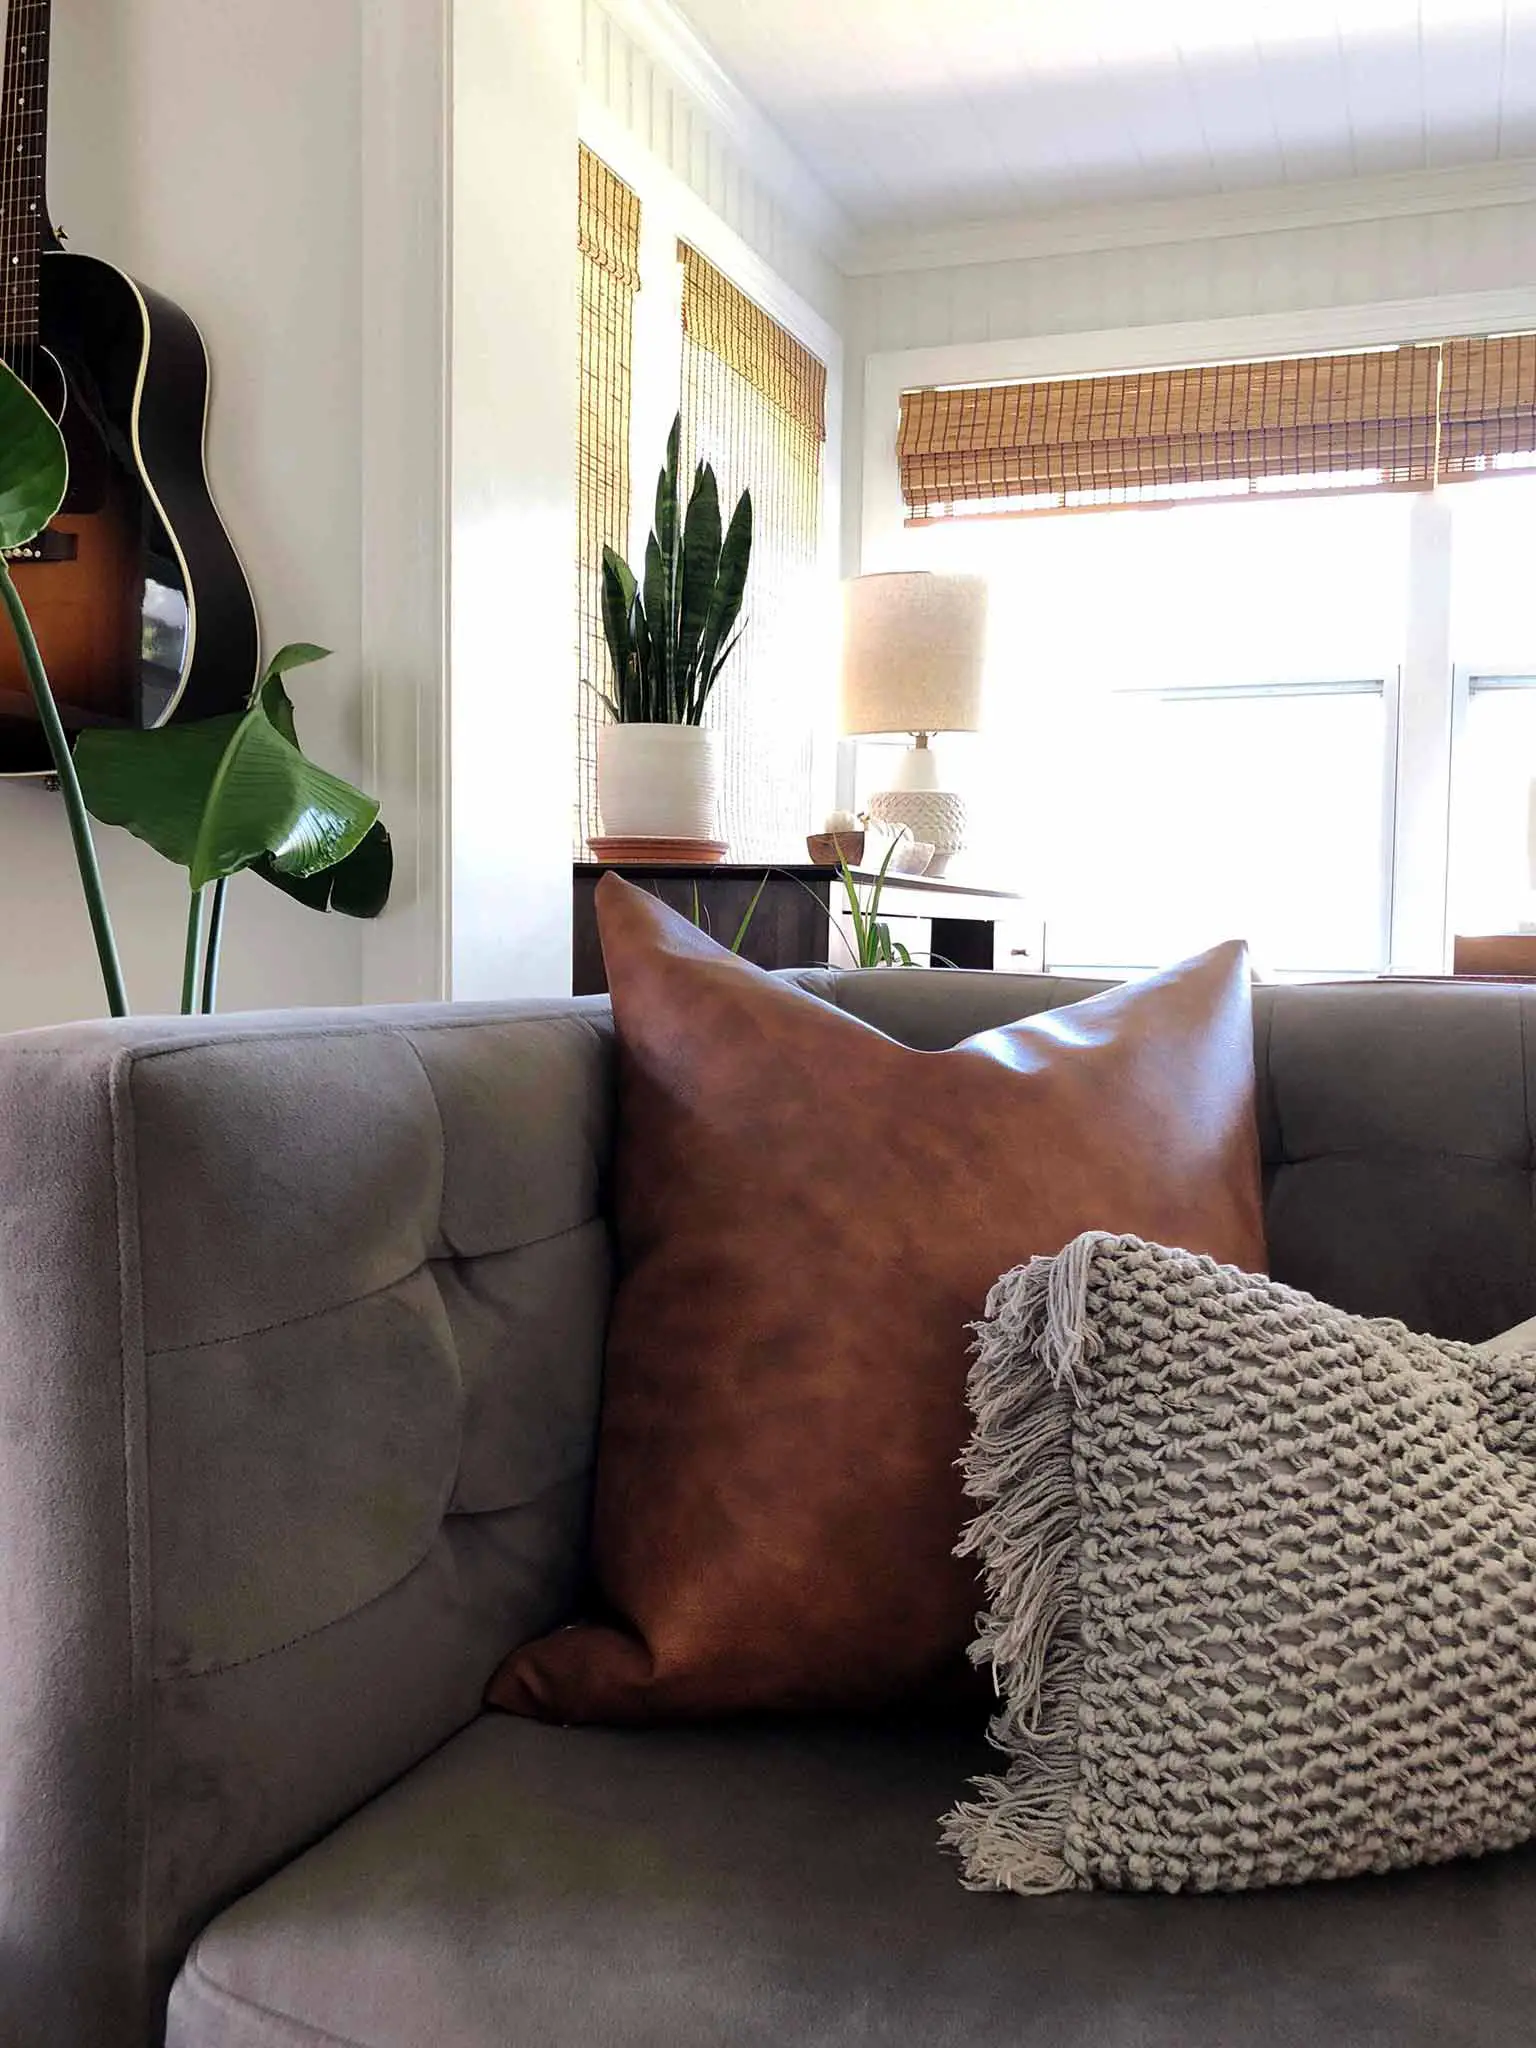 Decorating with pillows - Simple Fall Decor for the Uncluttered Home - That Homebird Life blog